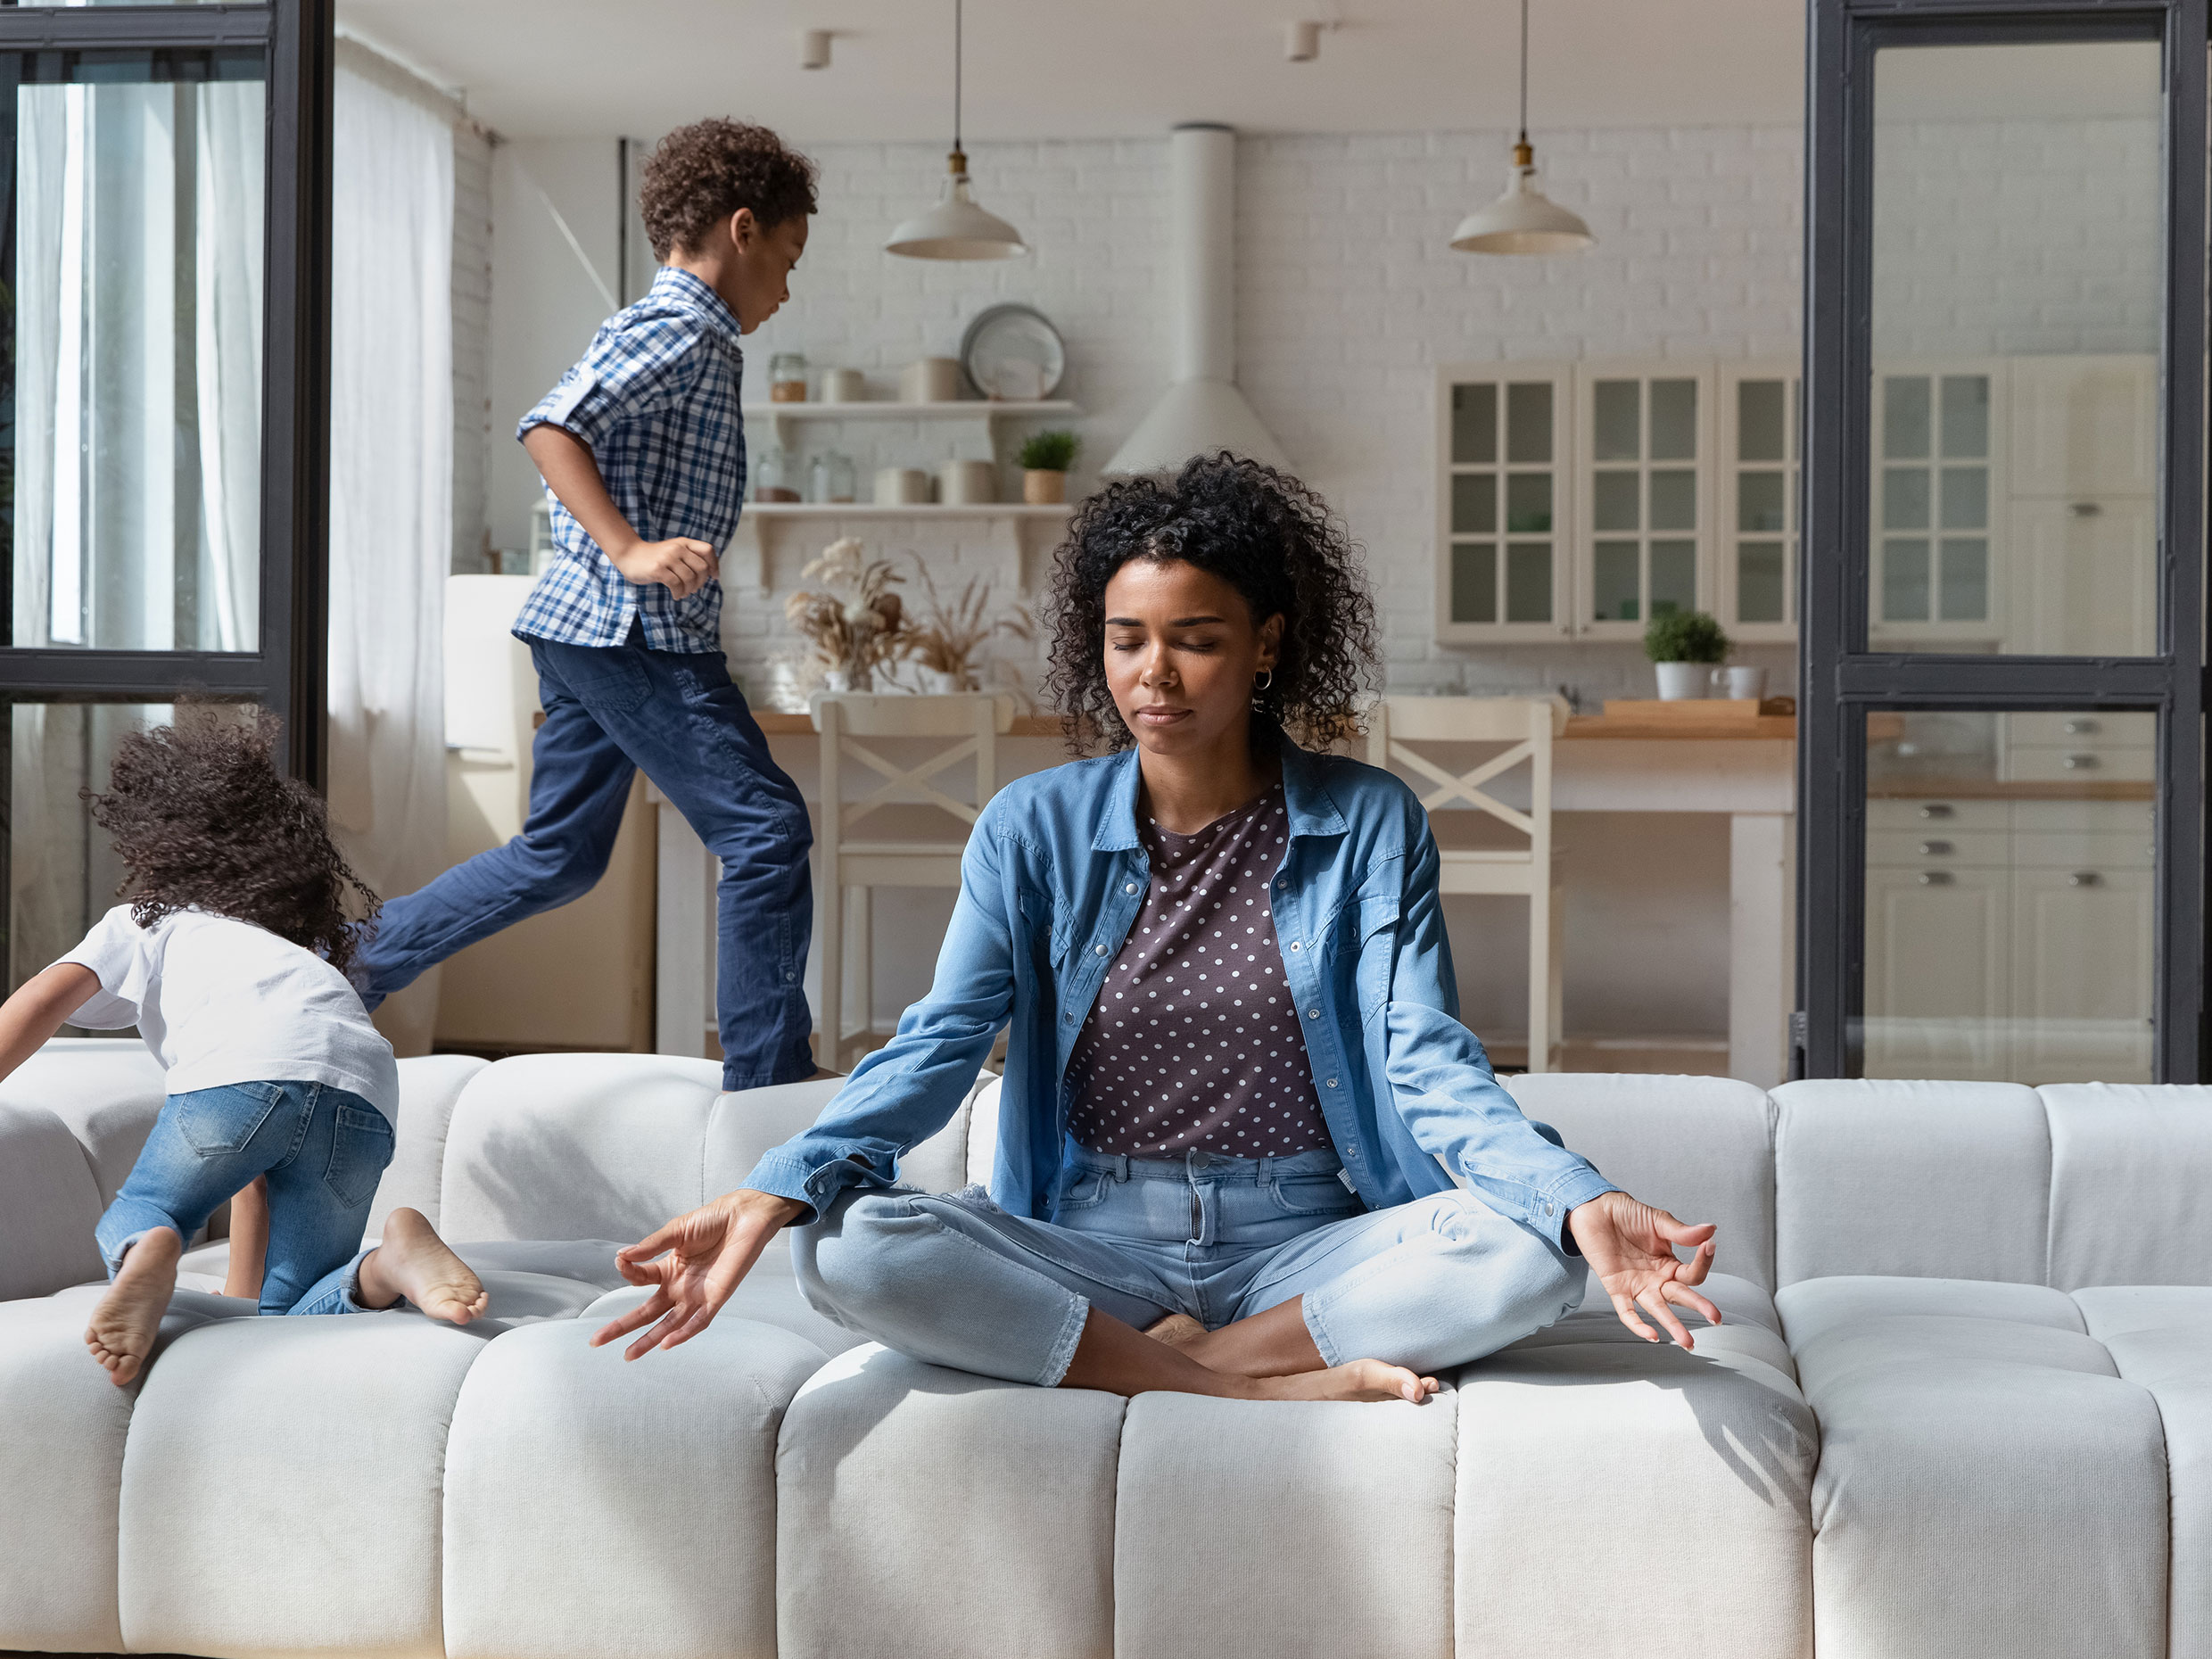 Woman meditating on couch while child runs in background.